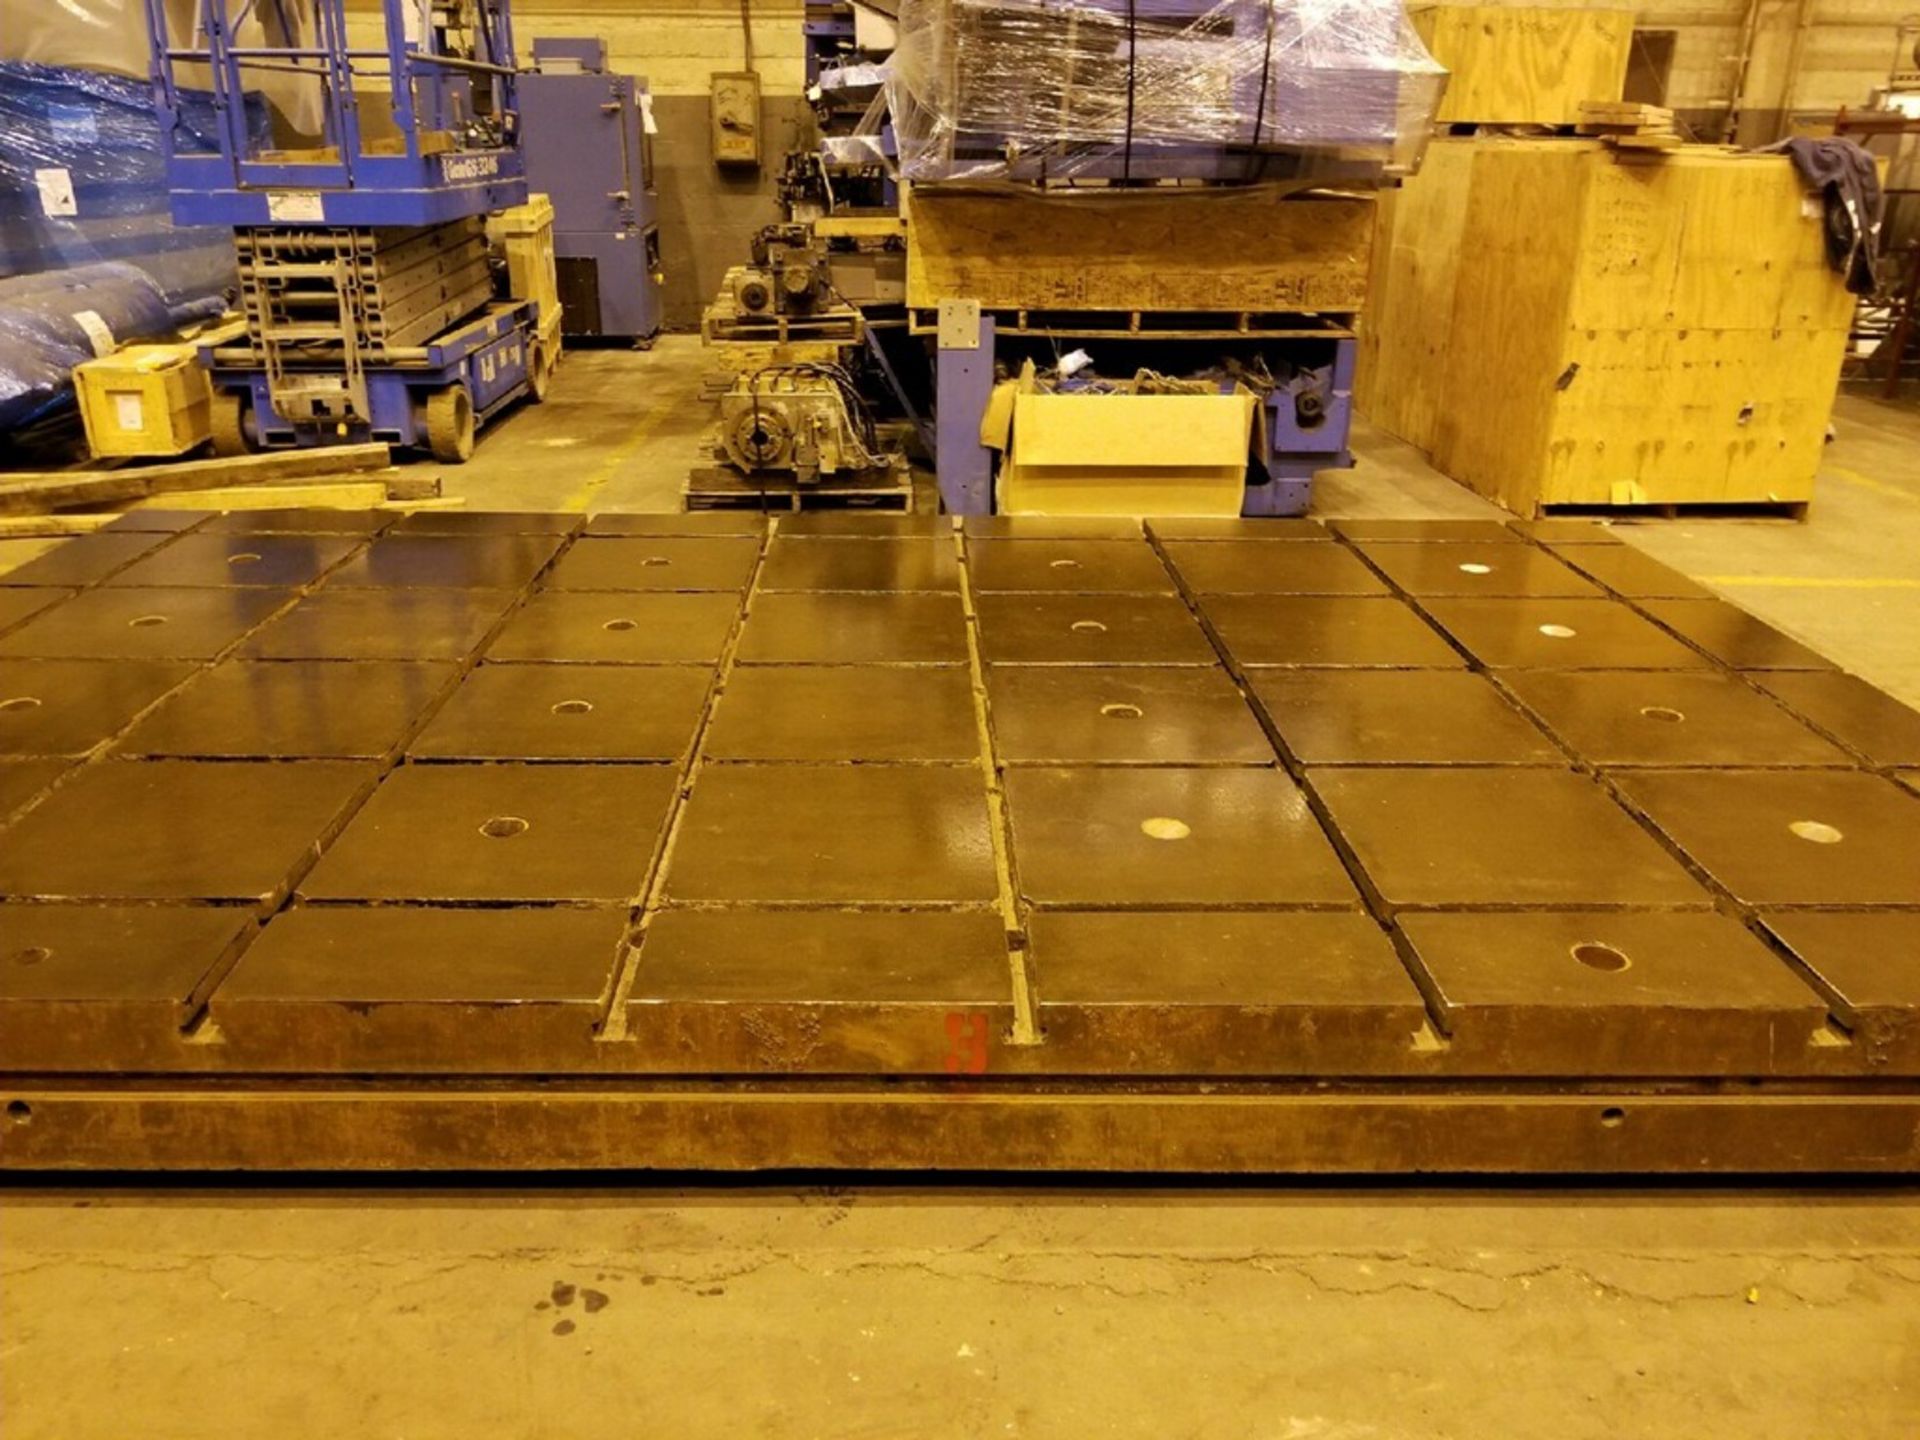 T-Slotted Floor Plate 16FT x 10FT x 12 IN - Plate #3 - Image 3 of 4